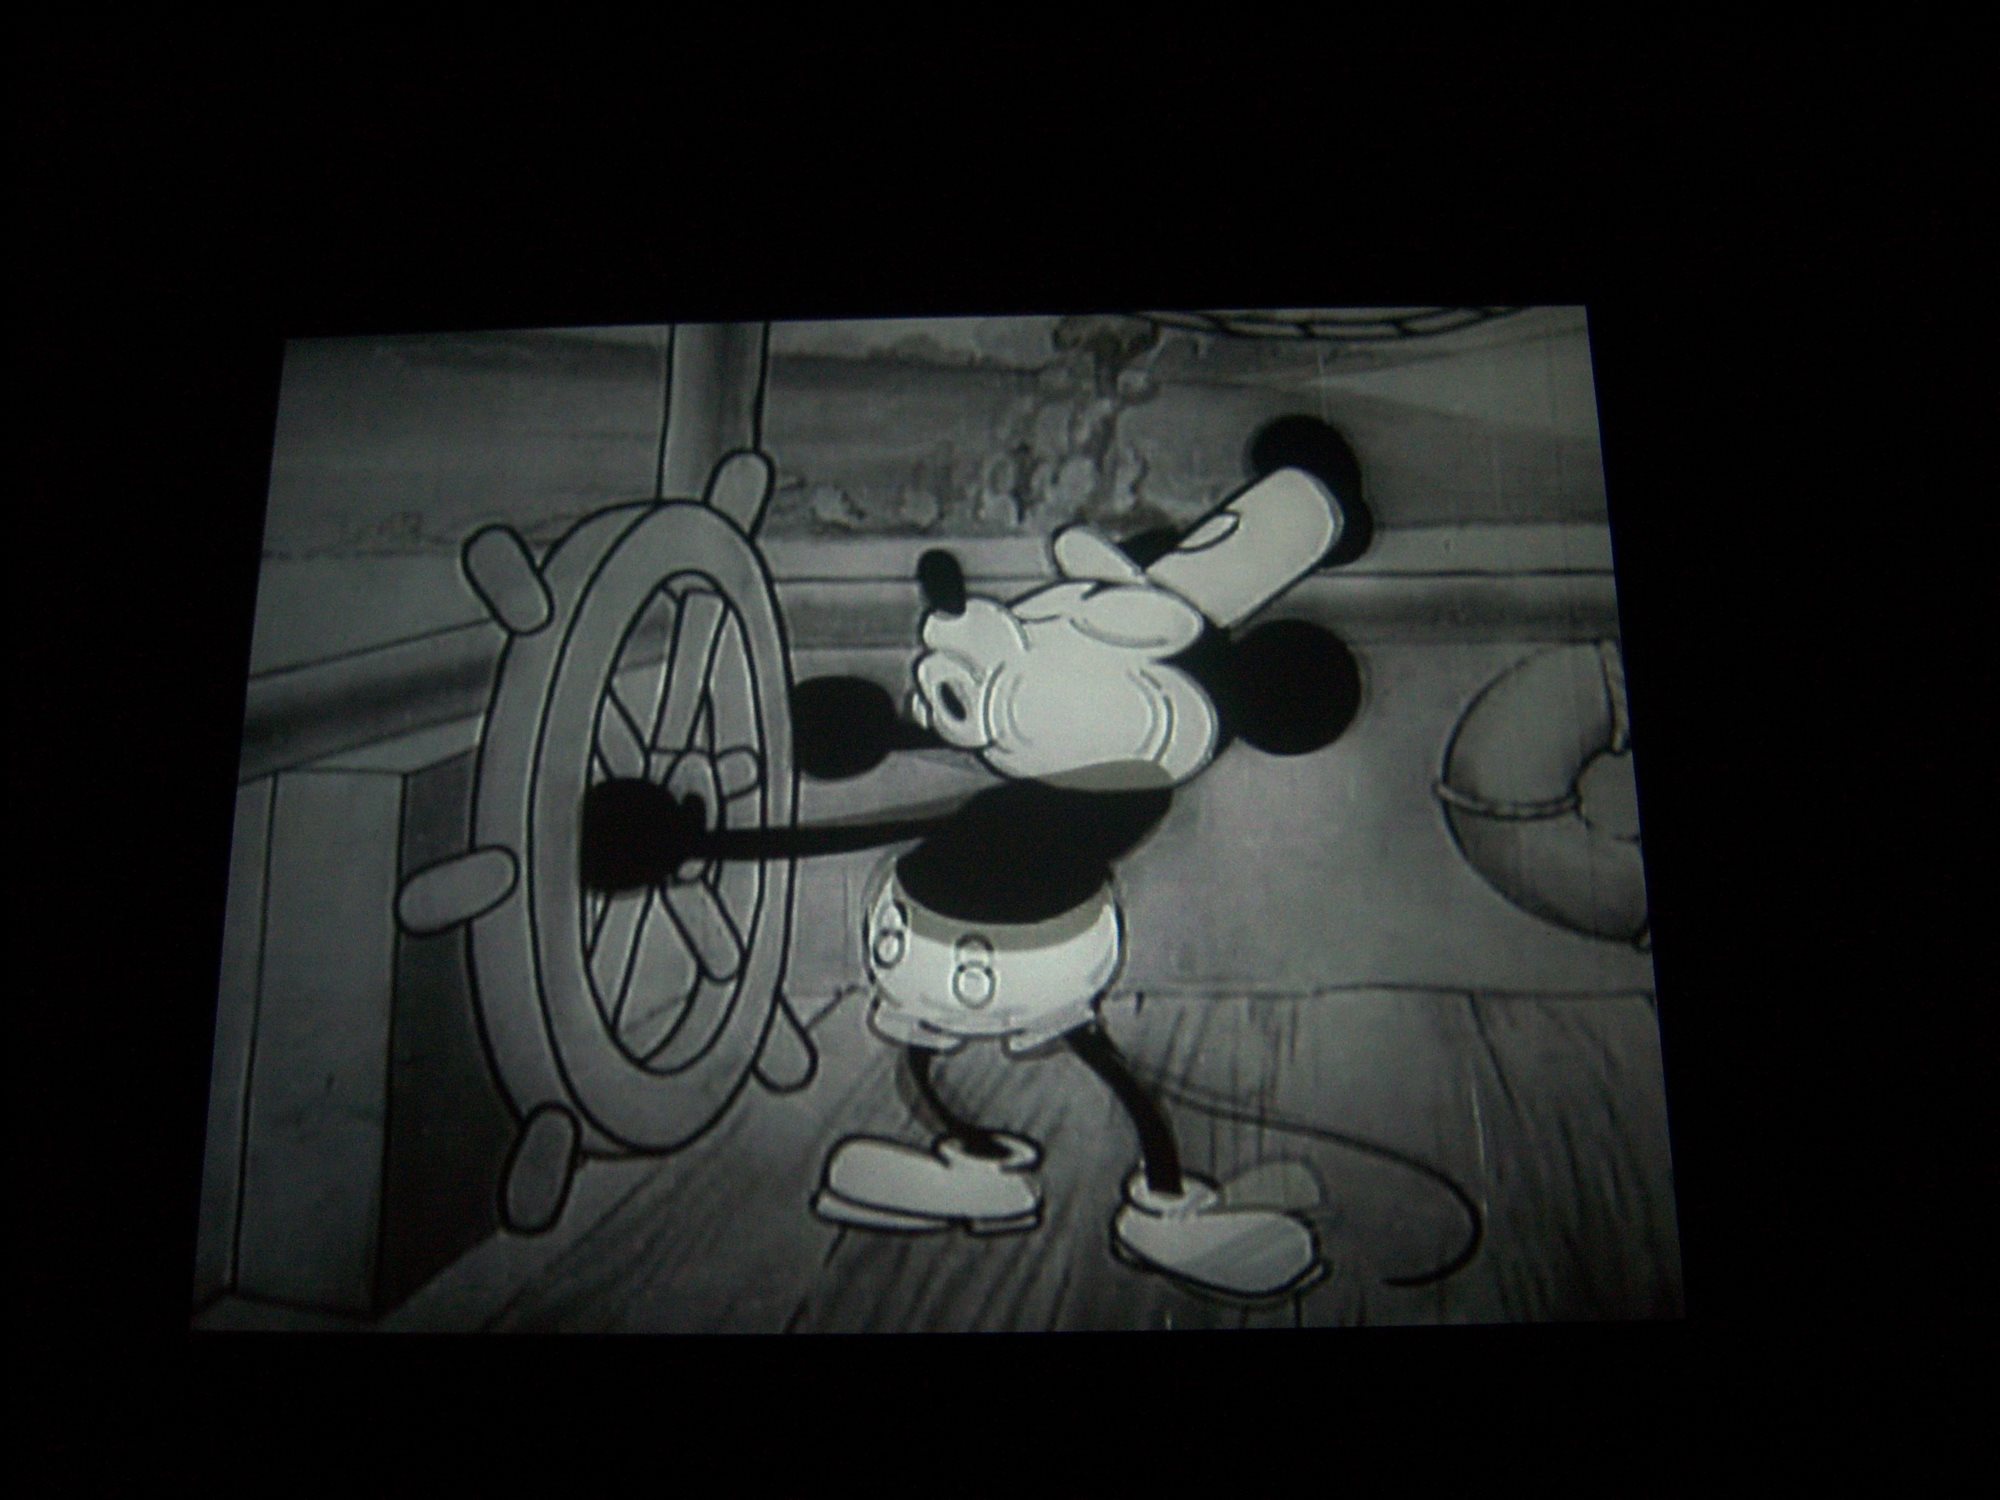 Mickey Mouse debuted in Steamboat Willie, whose copyright is expiring at the end of 2023